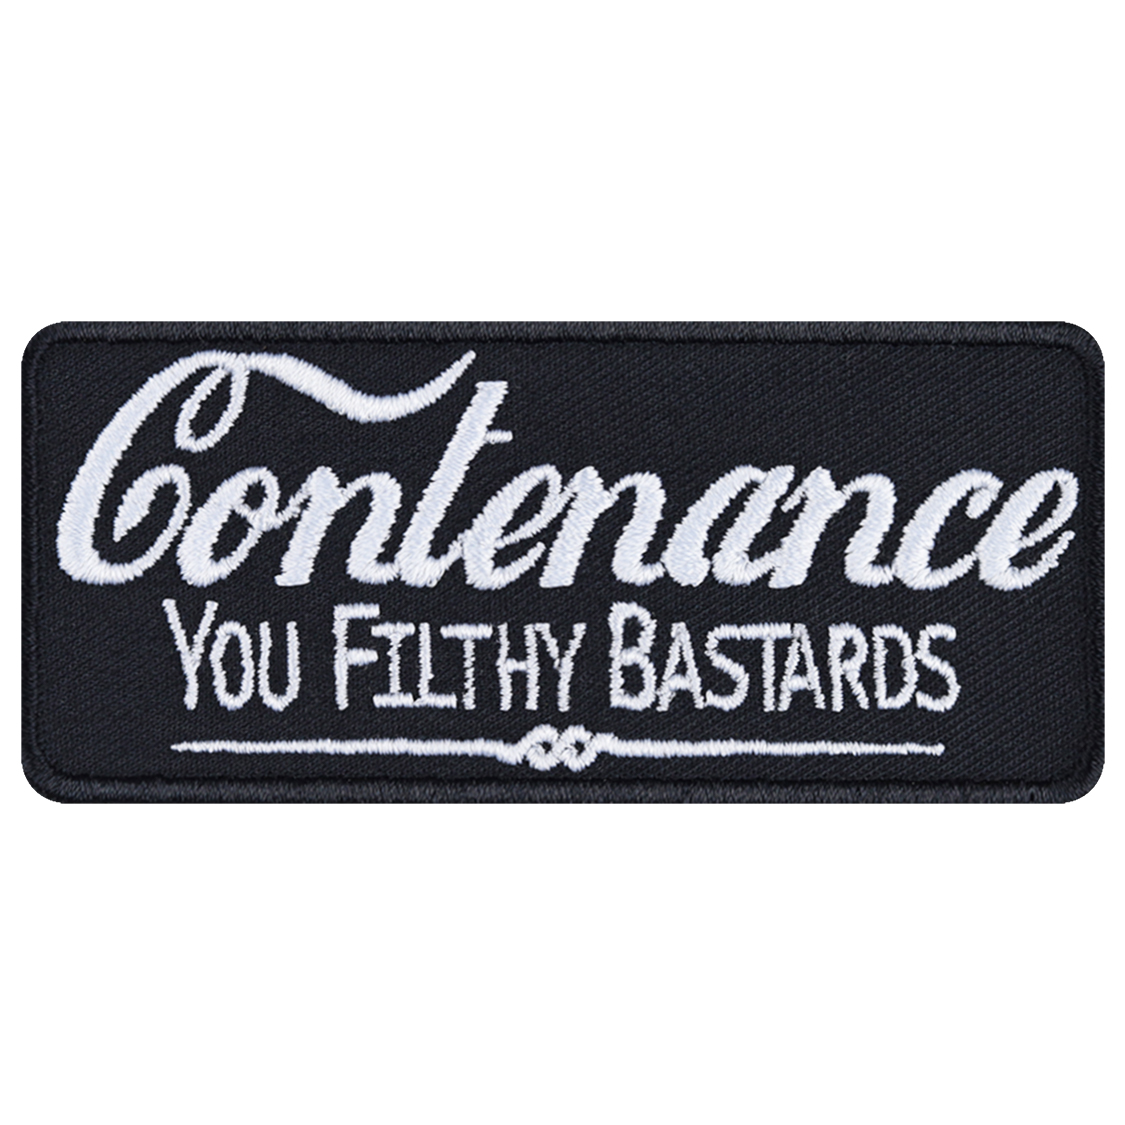 Contenance you filthy bastards - Patch